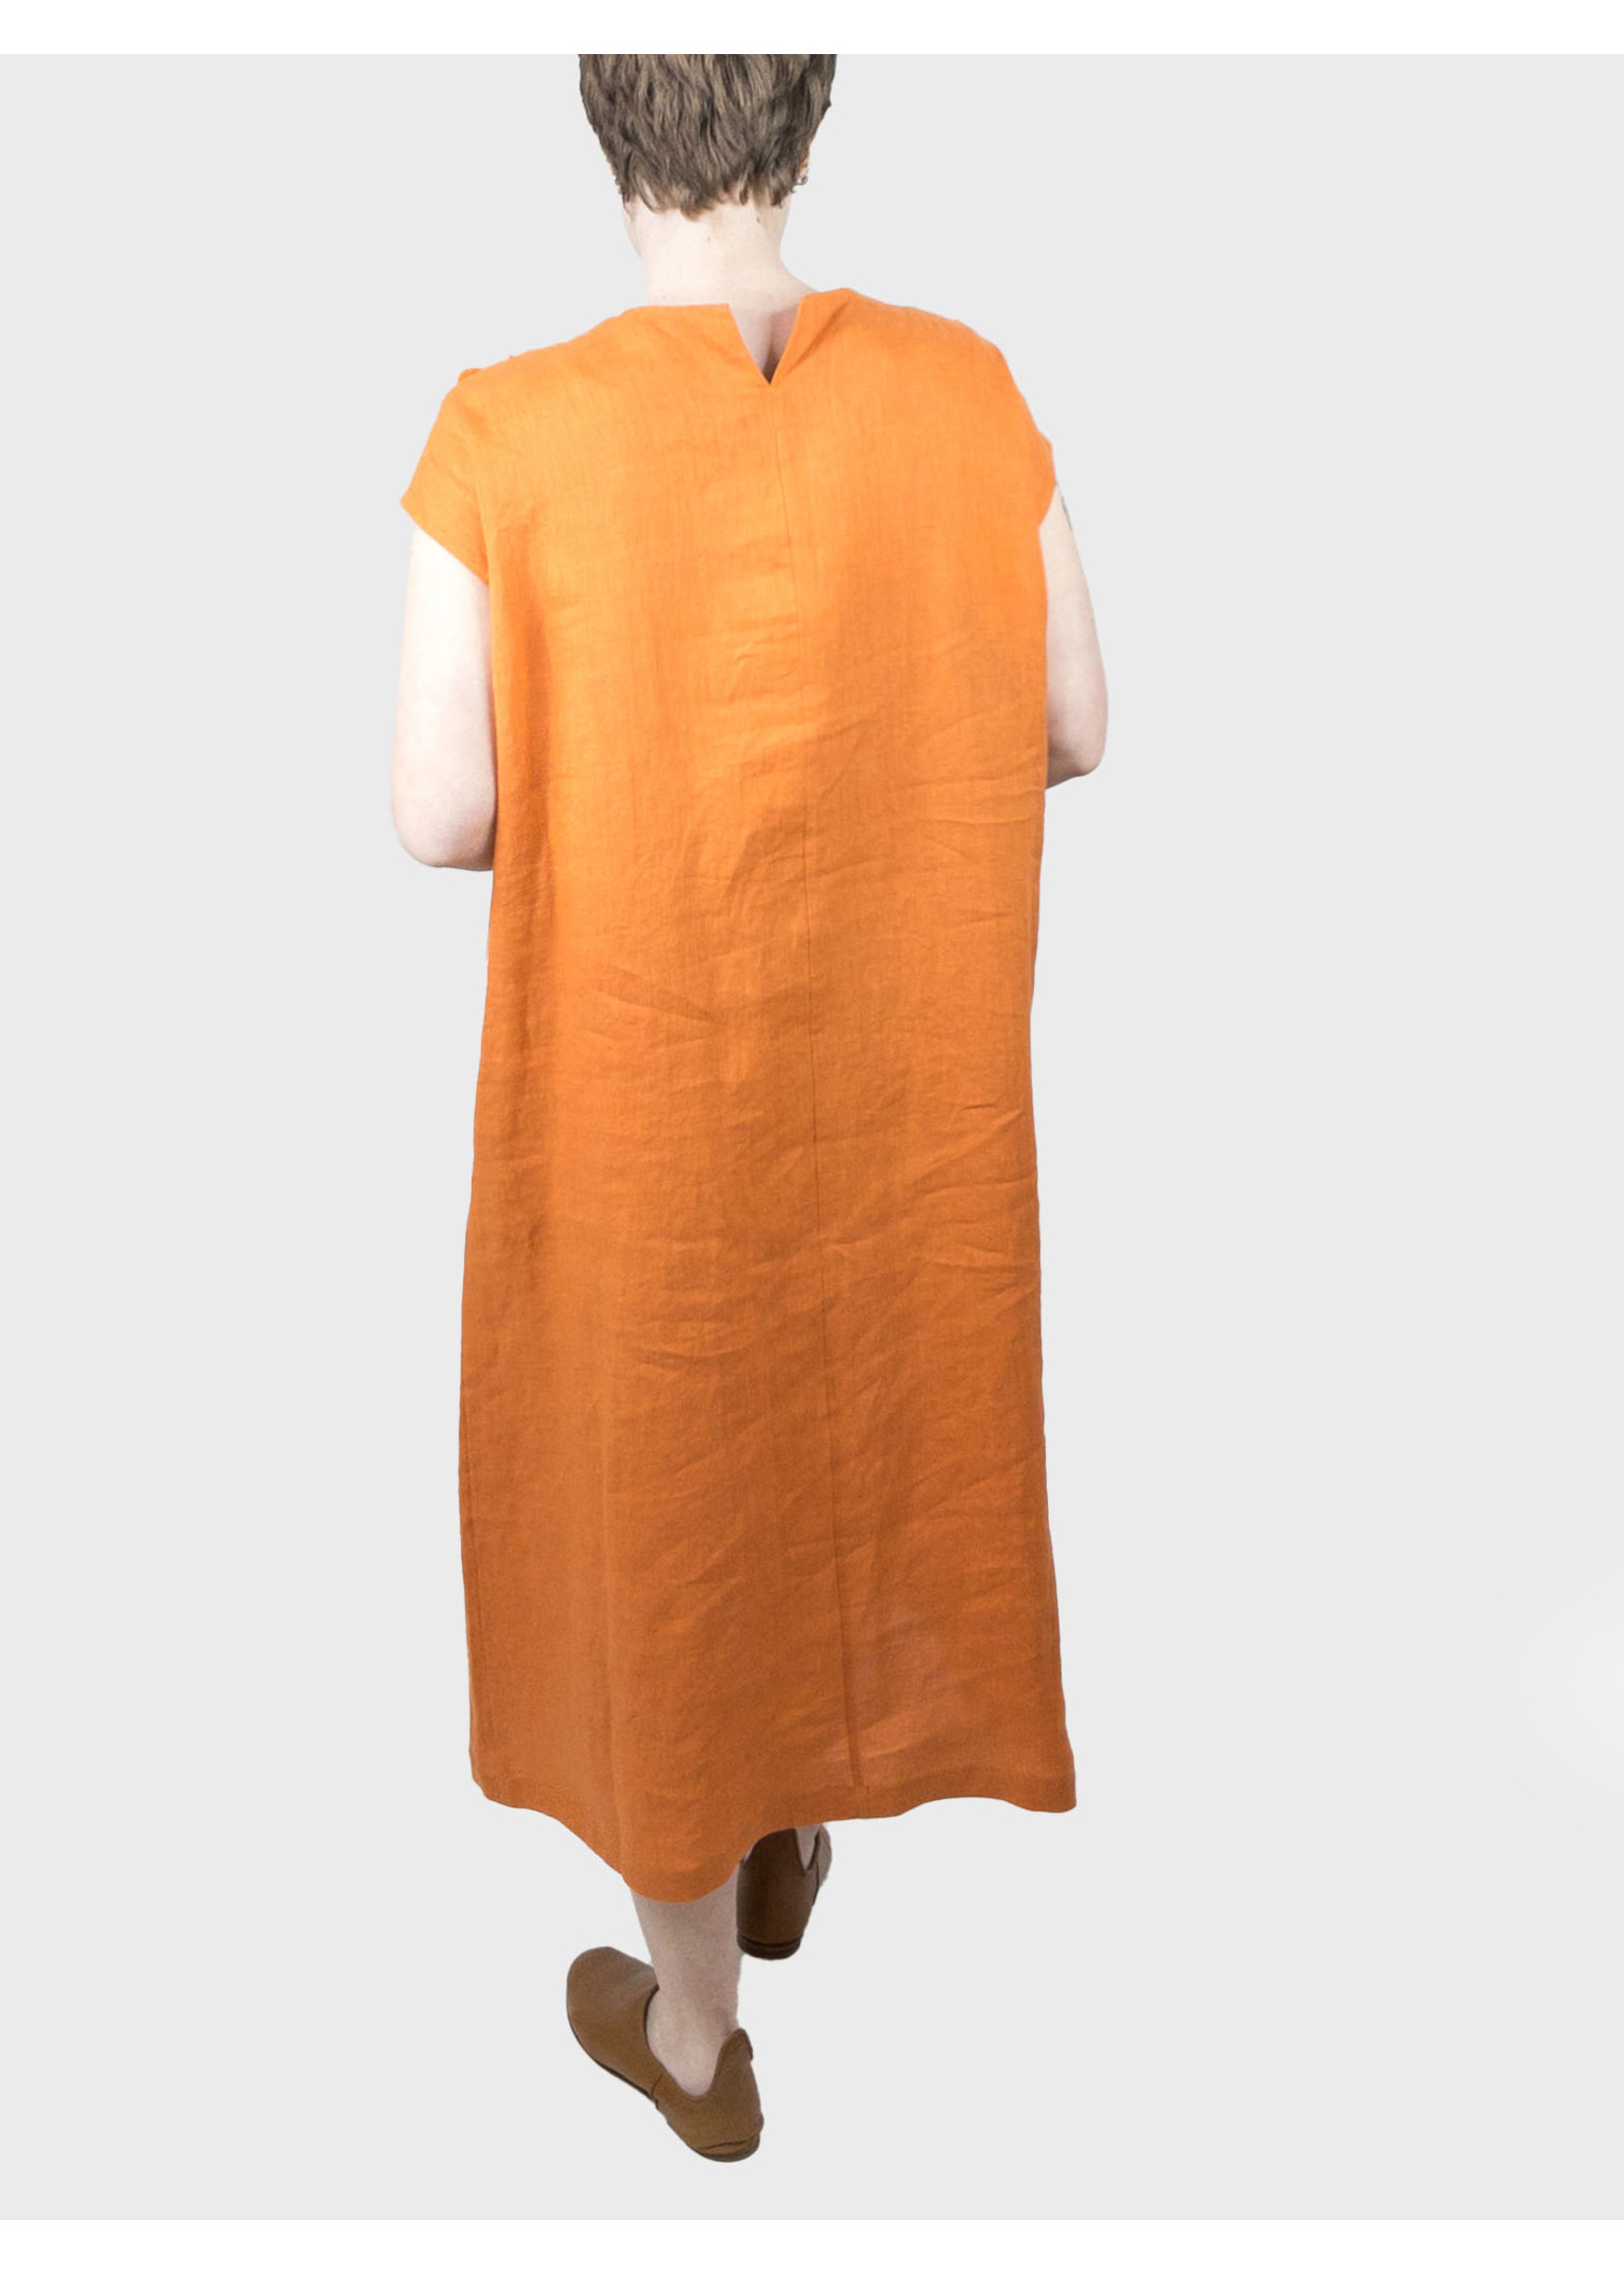 ANTIPAST Linen Dress with Knit Panel